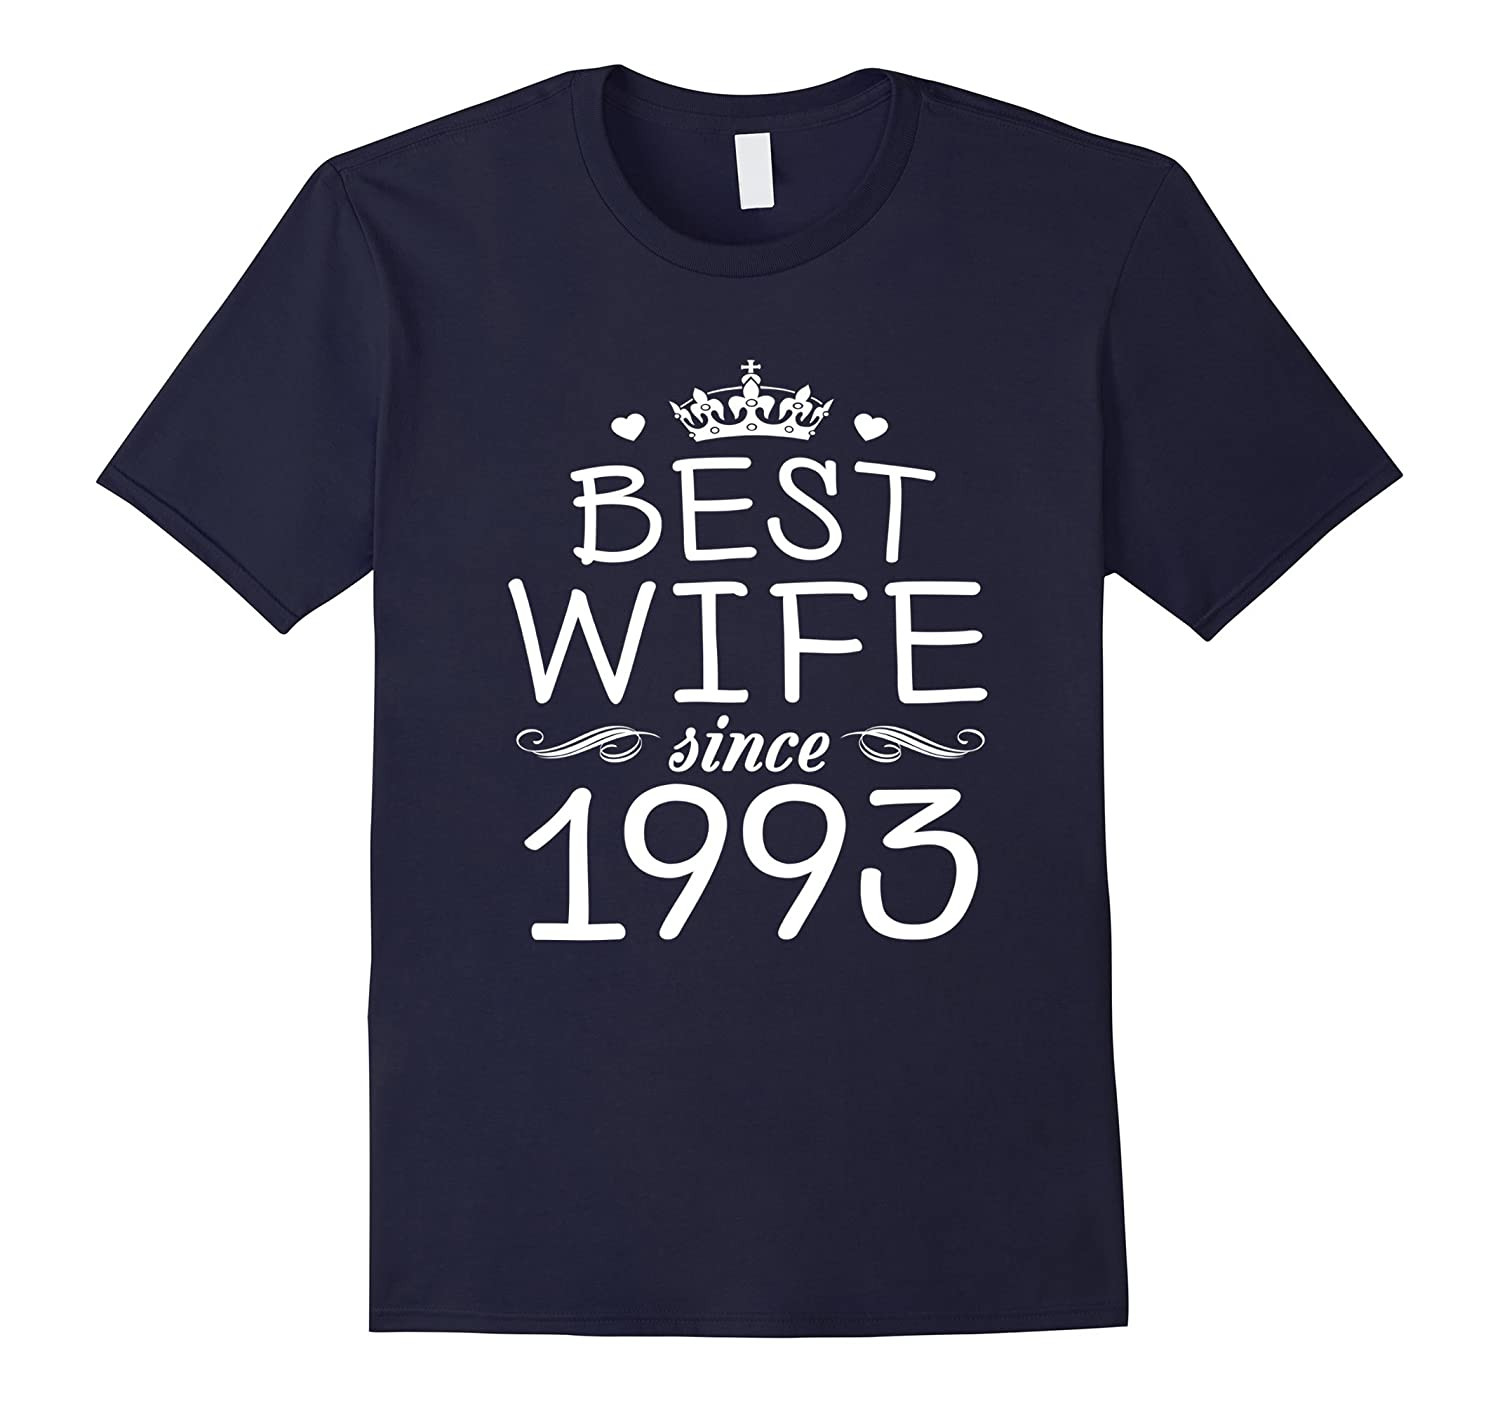 24Th Anniversary Gift Ideas
 24th Wedding Anniversary Gift Ideas For Her Wife Since 1993